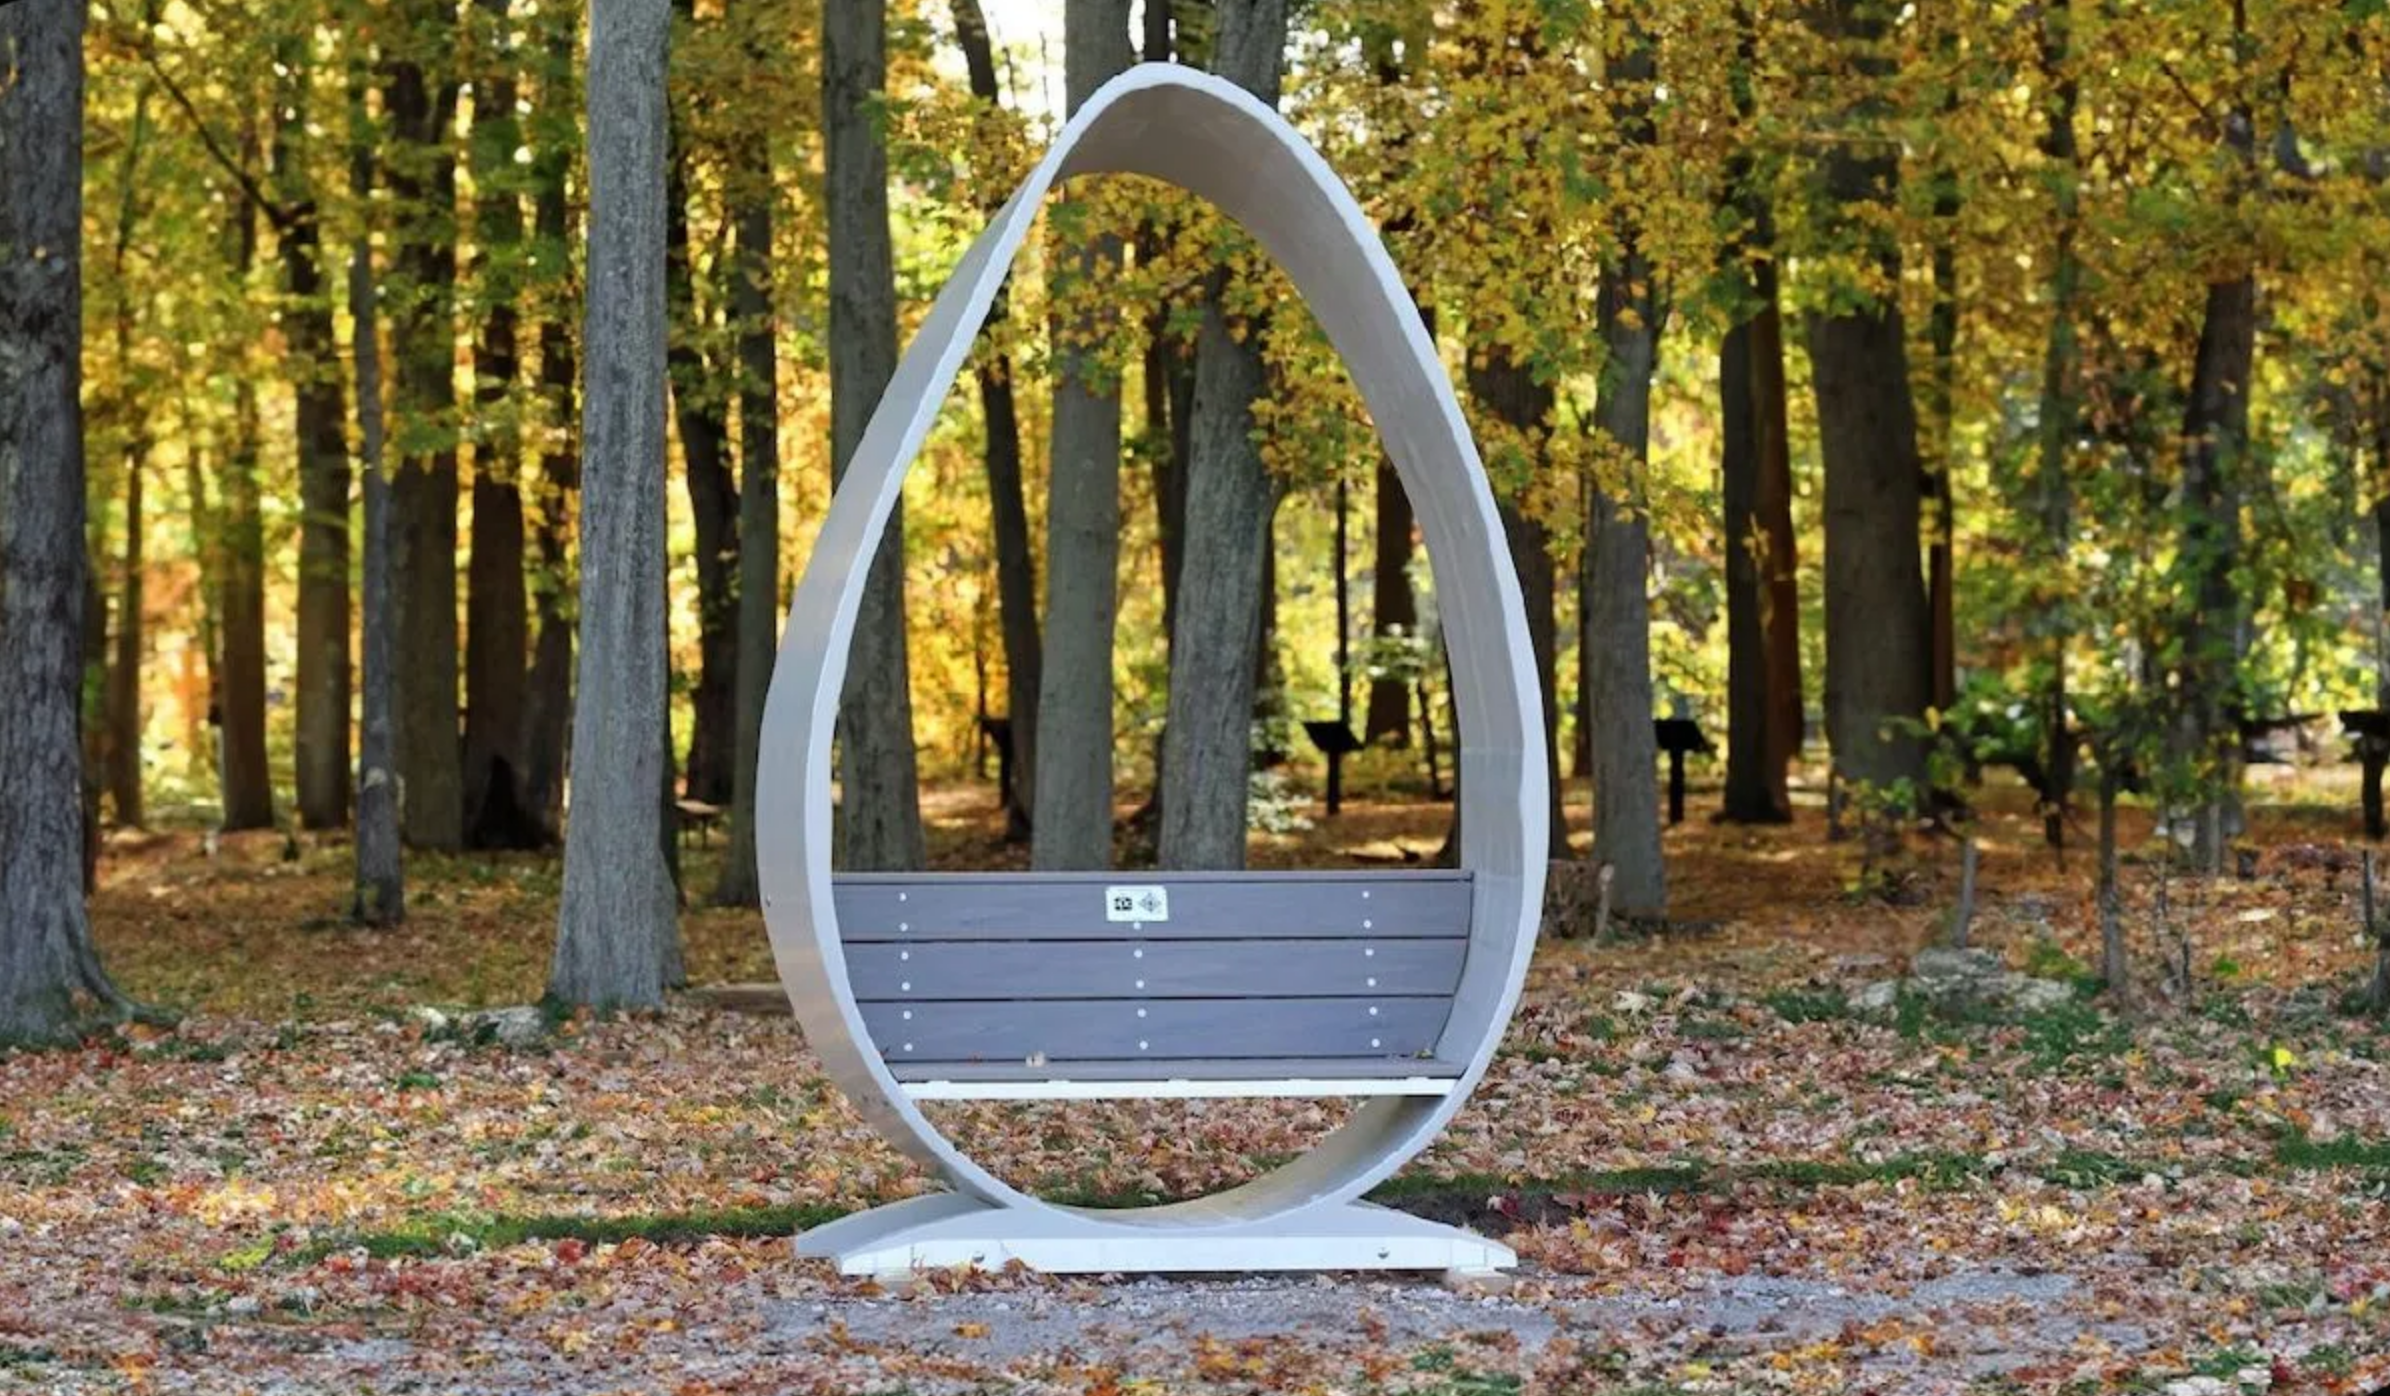 From Blades to Benches: Canvus Transforms Wind Turbines into Functional Art